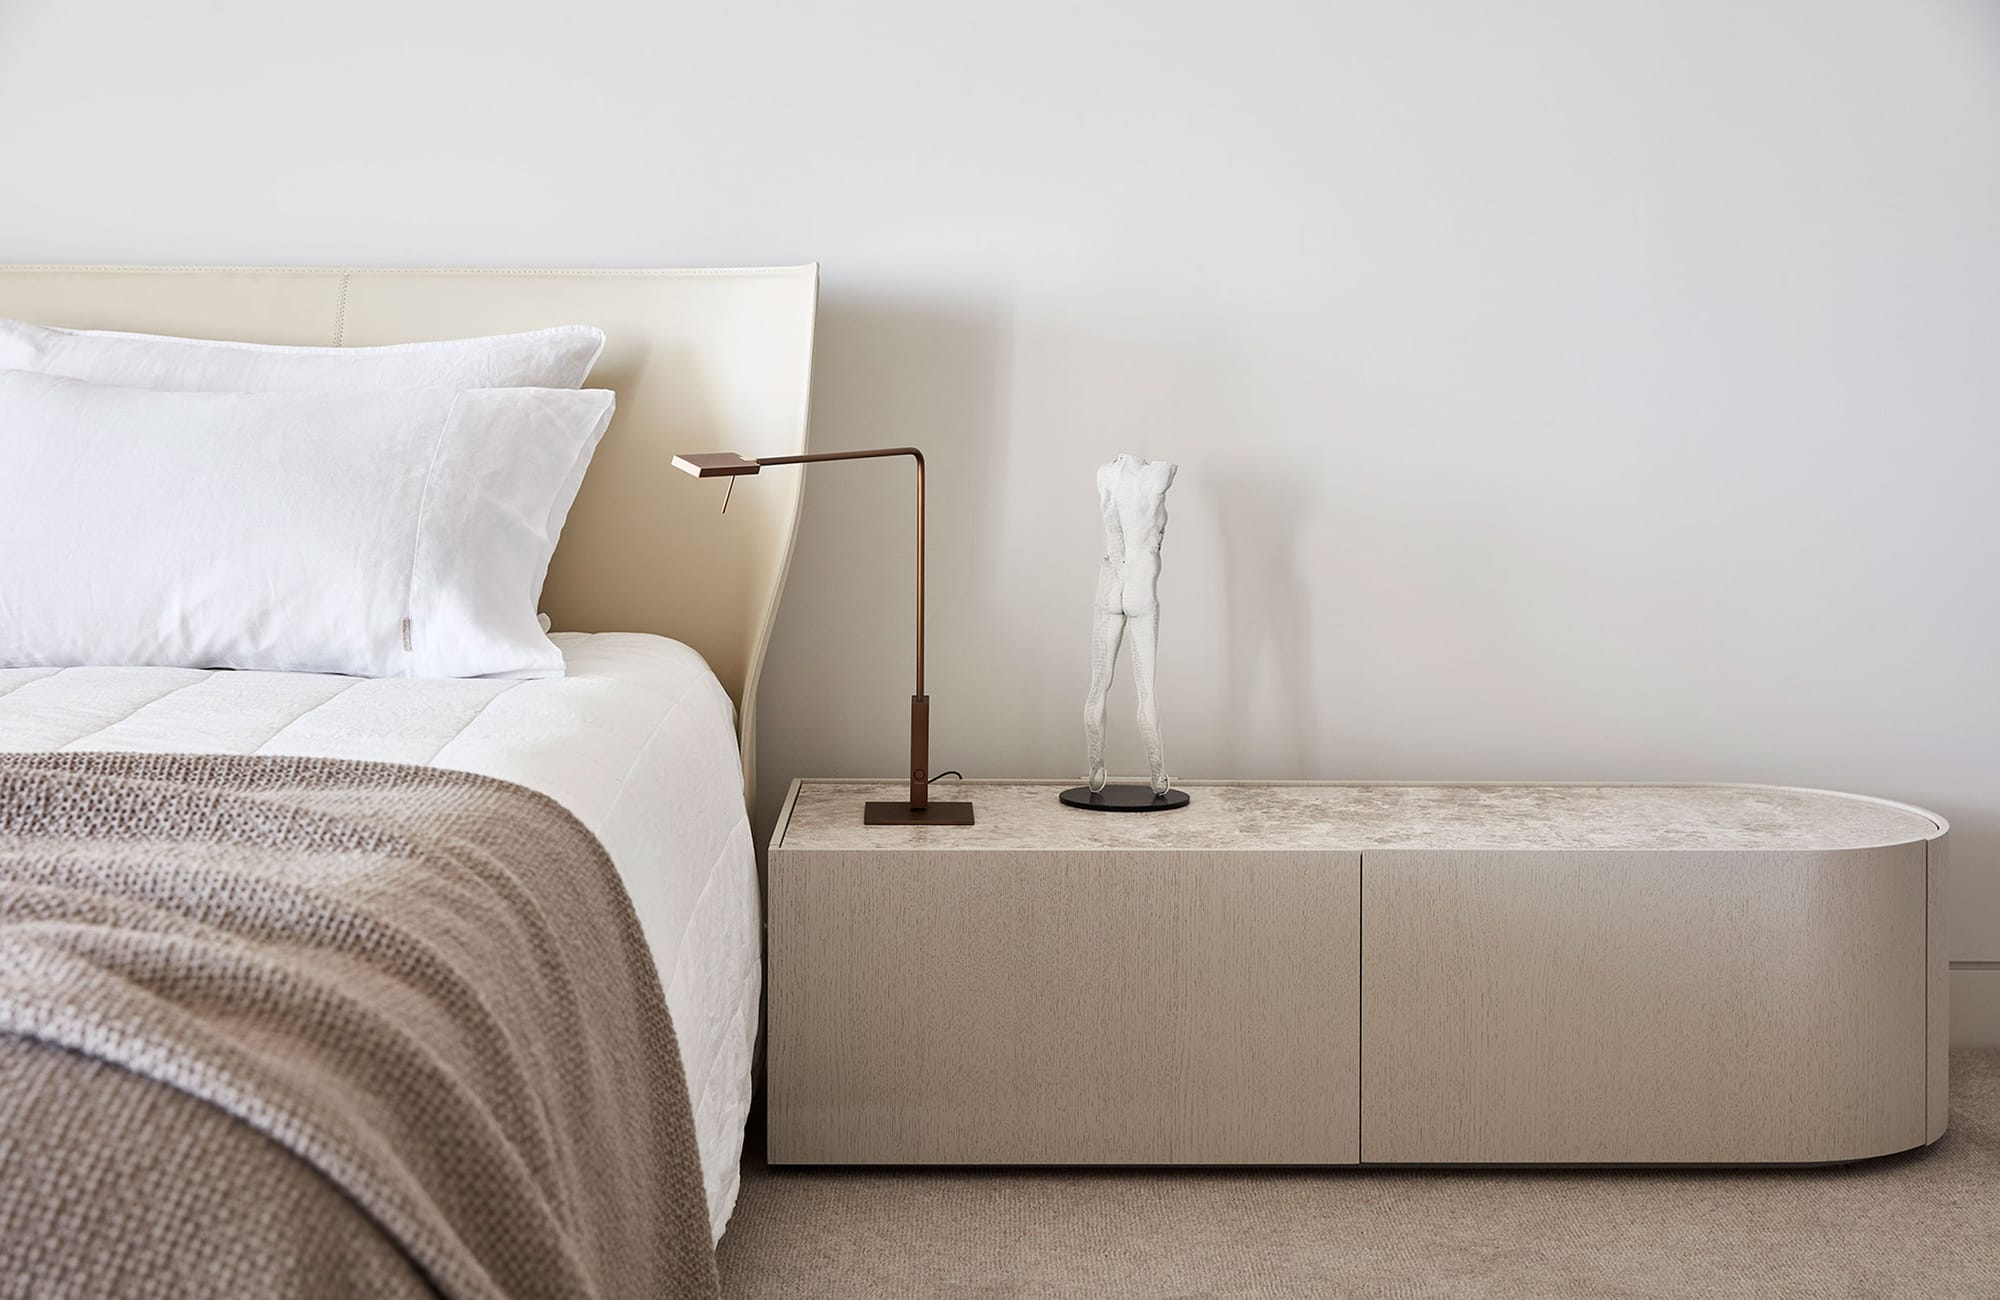 Arc Side by Jolson. Photography by Lucas Allen. Close up landscape shot of residential bedroom. White walls and carpeted floors in neutral, warm tone shade. Long, organically curved bedside table in light timber finish. White bed linen with brown throw rug. 